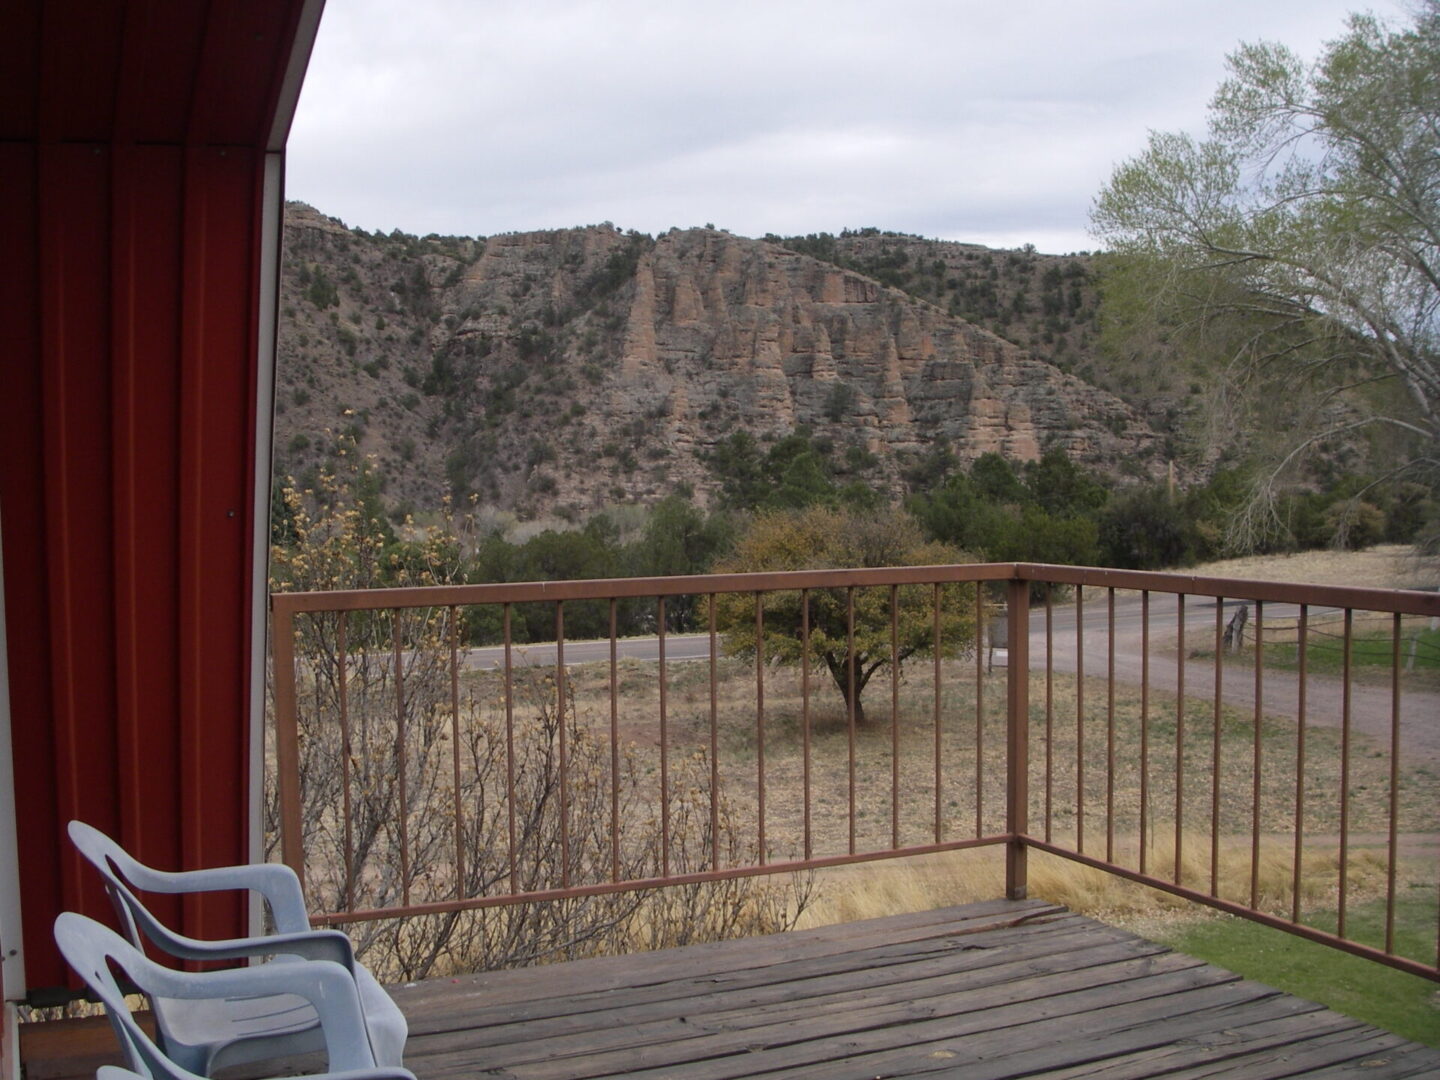 A view of a mountain from the deck.